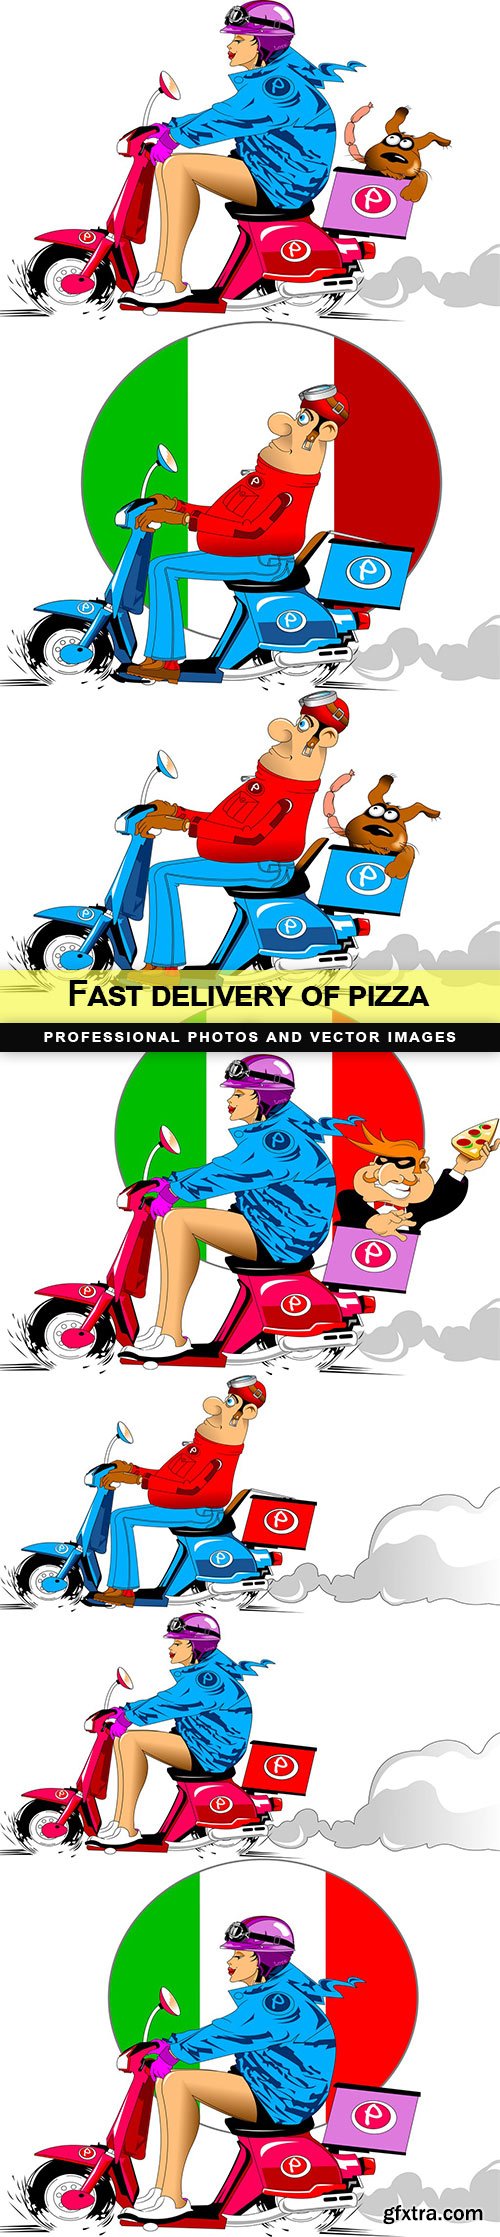 fast delivery of pizza